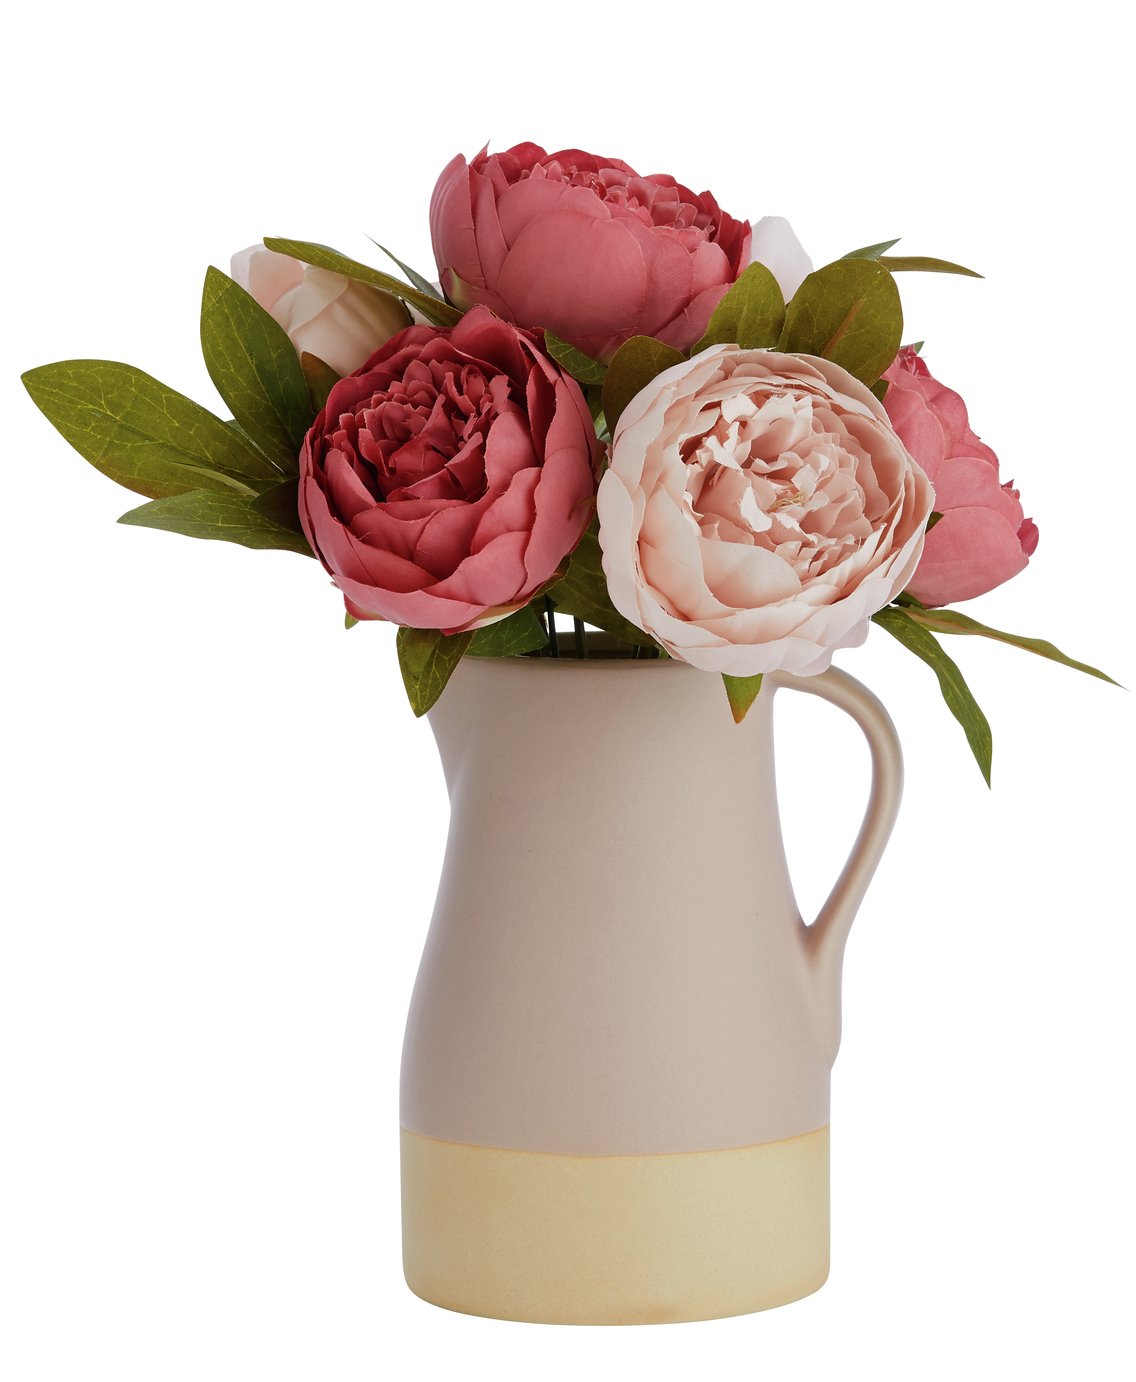 Sainsbury's Home Botanist Peonies in Pitcher review